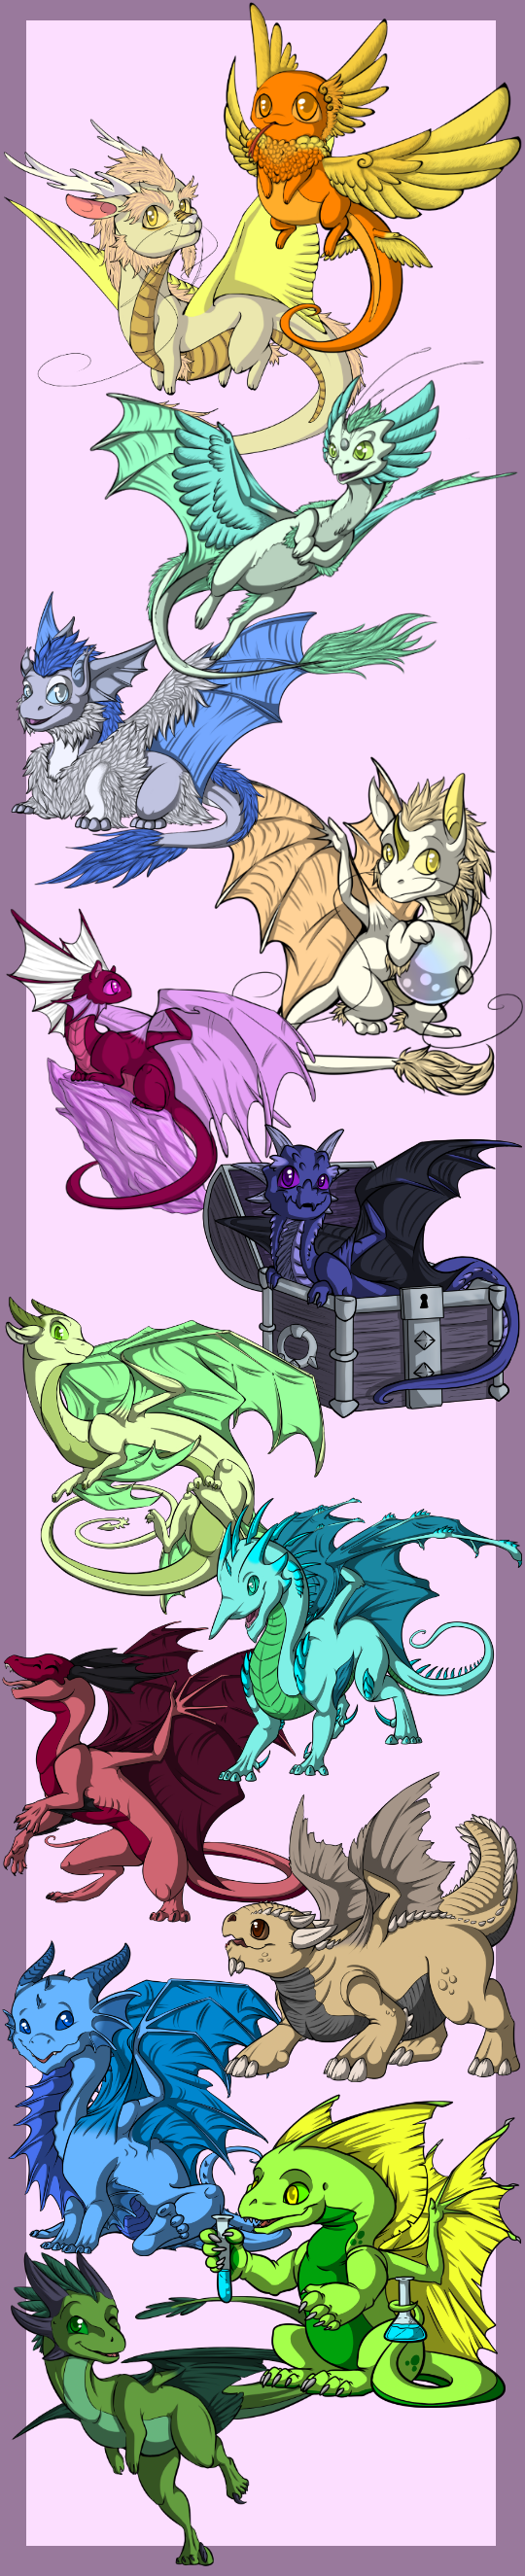 cc_crew_lineup_all_breeds_by_00shadowdragon00-dc2m9o2.png